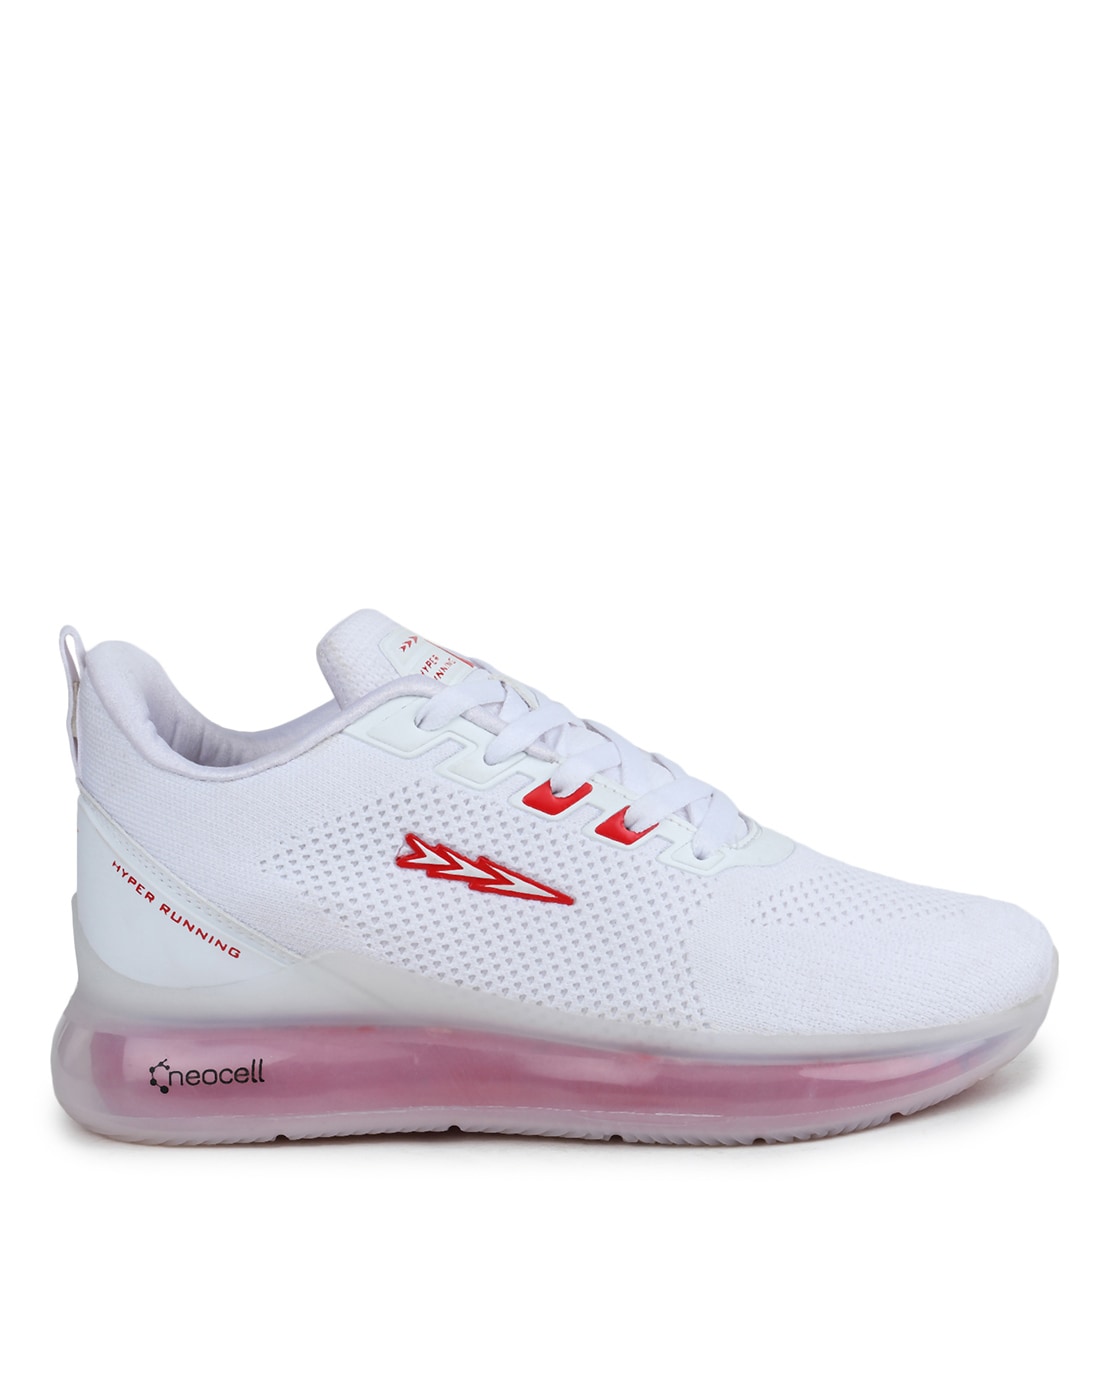 Buy White Sports Shoes for Men by COLUMBUS Online